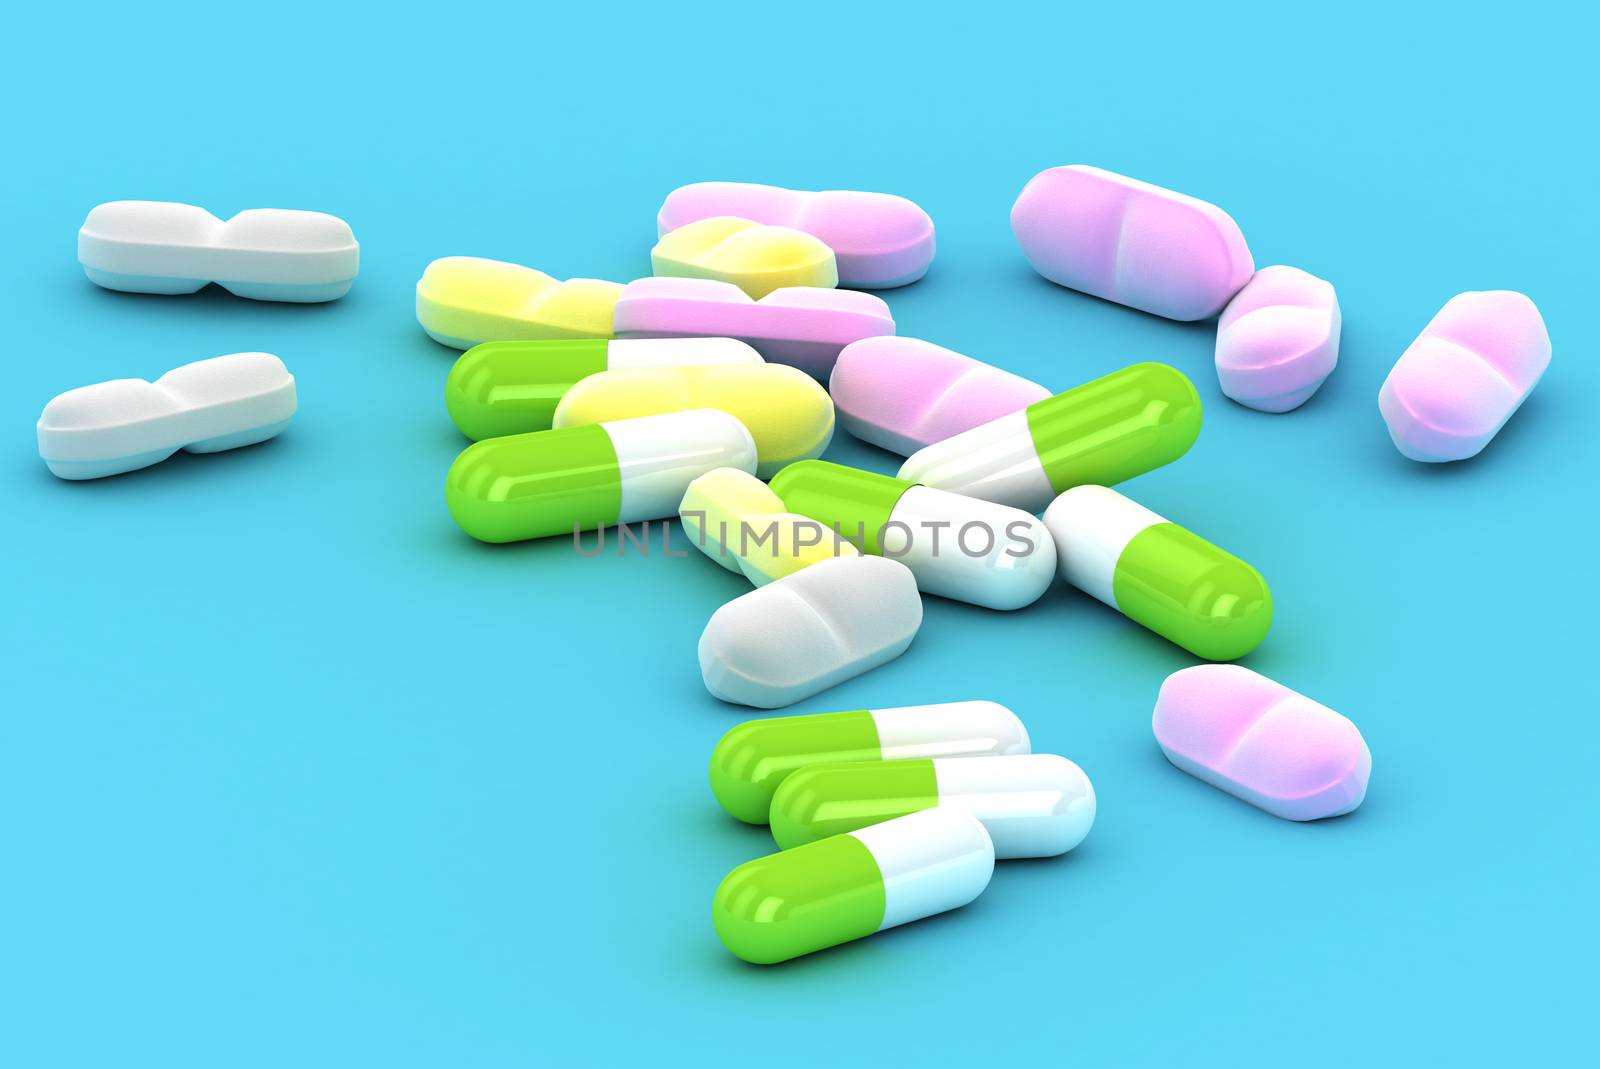 An Illustration of a Group of Pills on a blue background